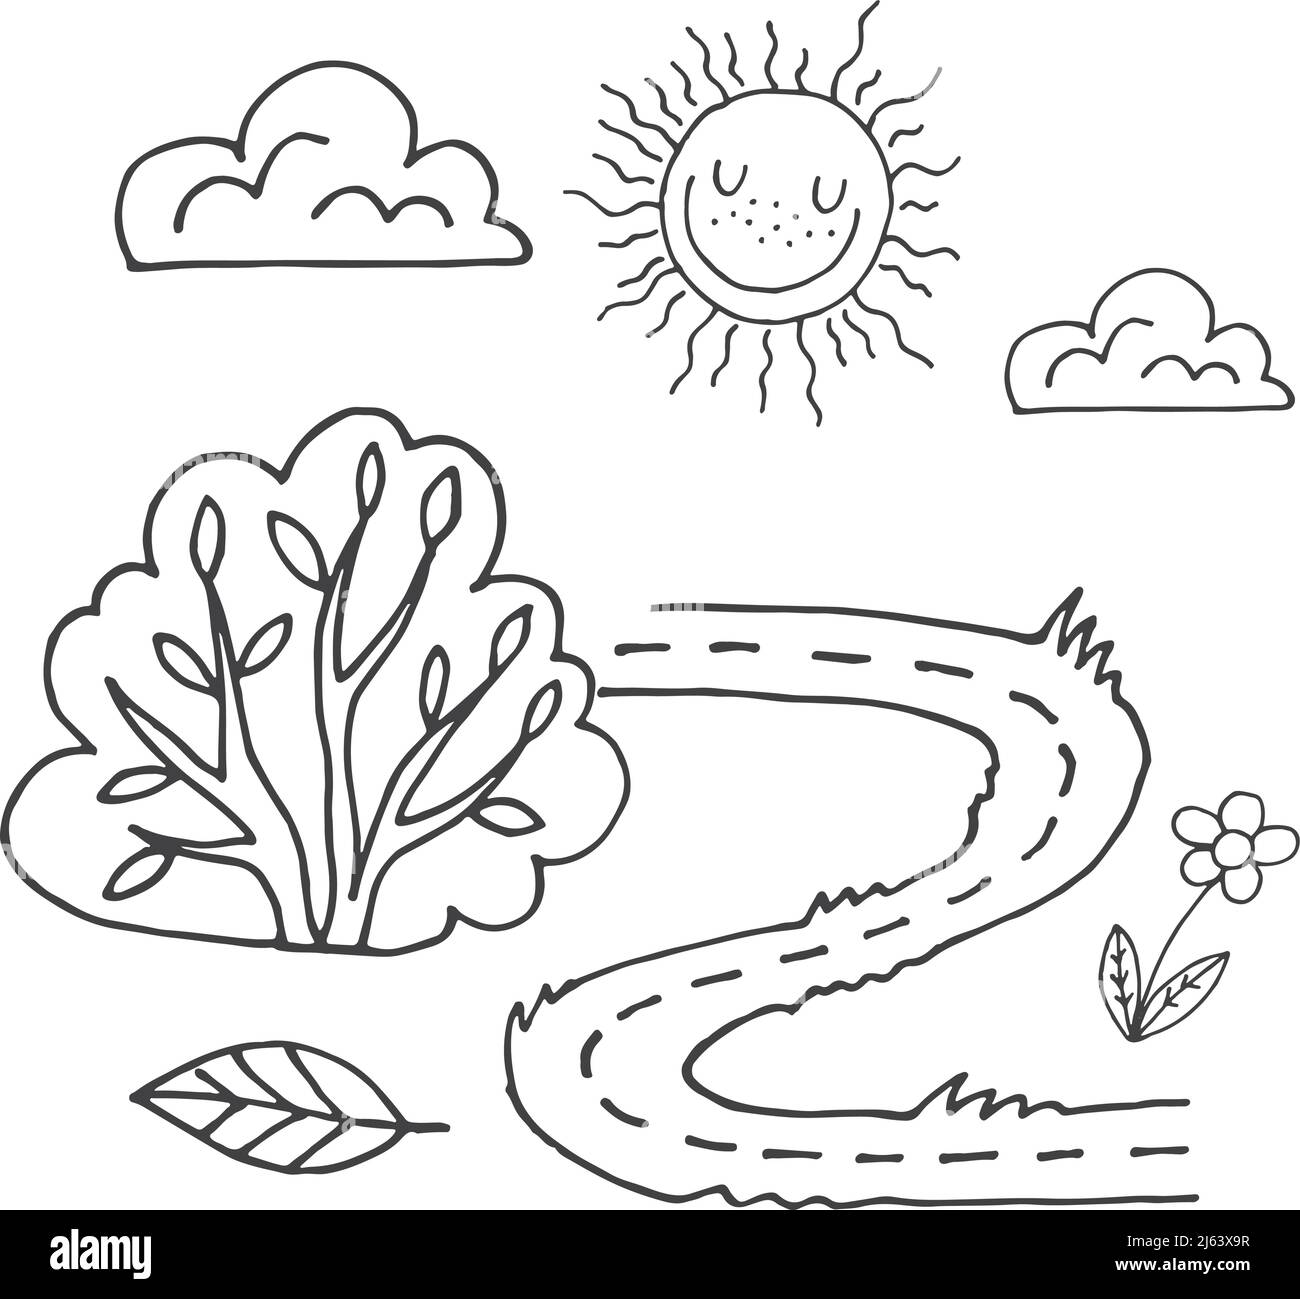 How to Draw Nature - Easy Drawing Tutorial For Kids-saigonsouth.com.vn